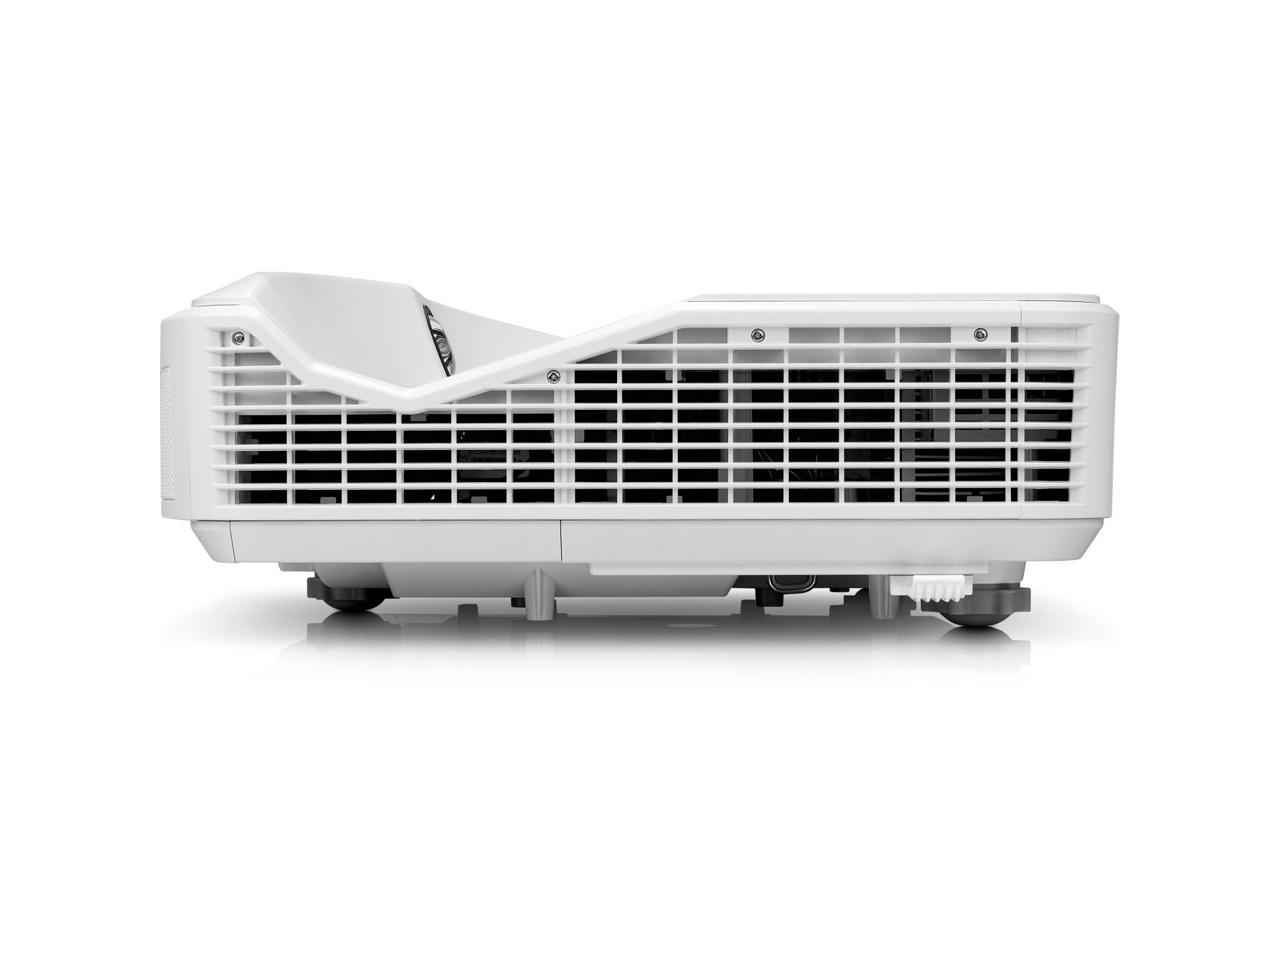 Dell - S560T - Dell S560T 3D Ready DLP Projector - 1080p - HDTV - 16:9 - Rear, Front - Interactive - 260 W - 3000 Hour